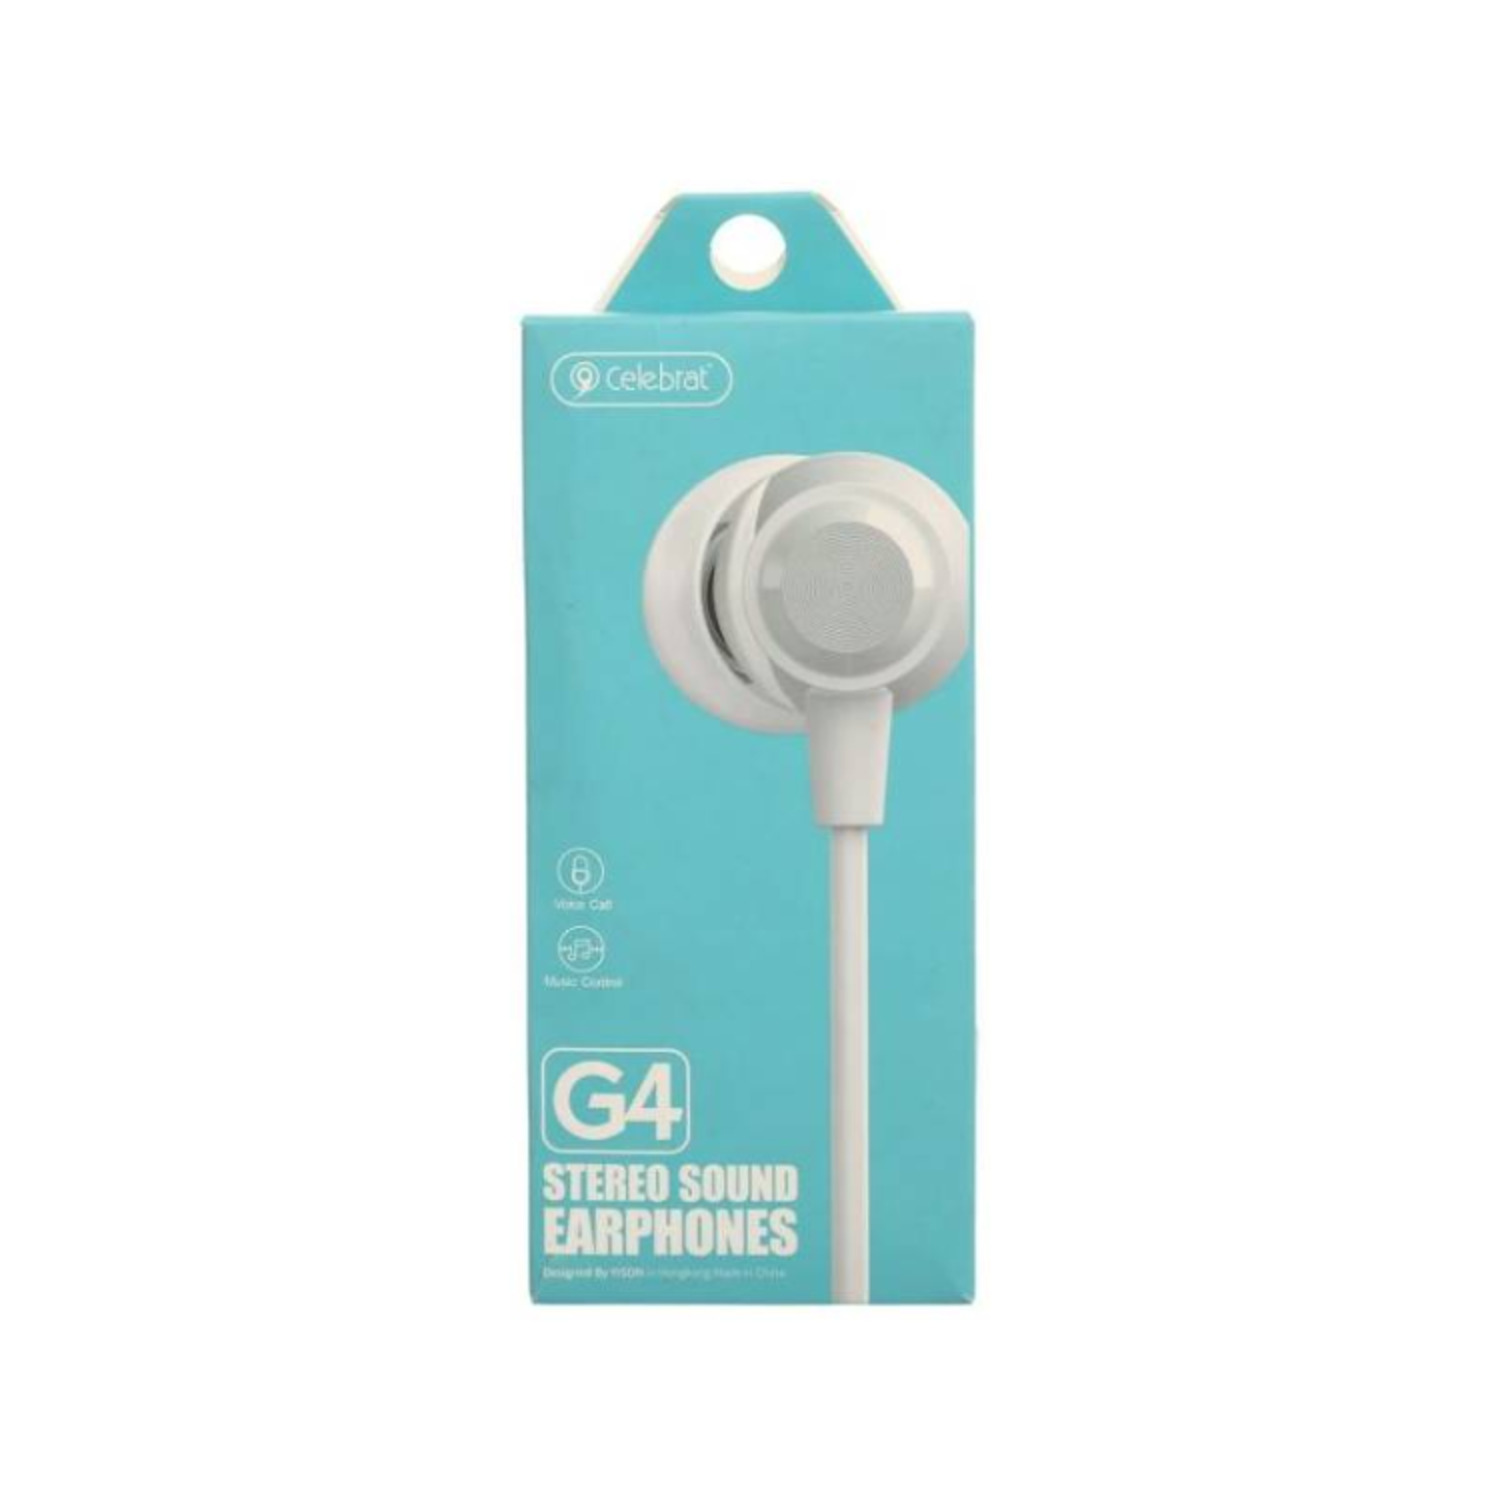 CELEBRAT G4 STEREO SOUND EARPHONES FOR VOICE CALL AND MUSIC - WHITE